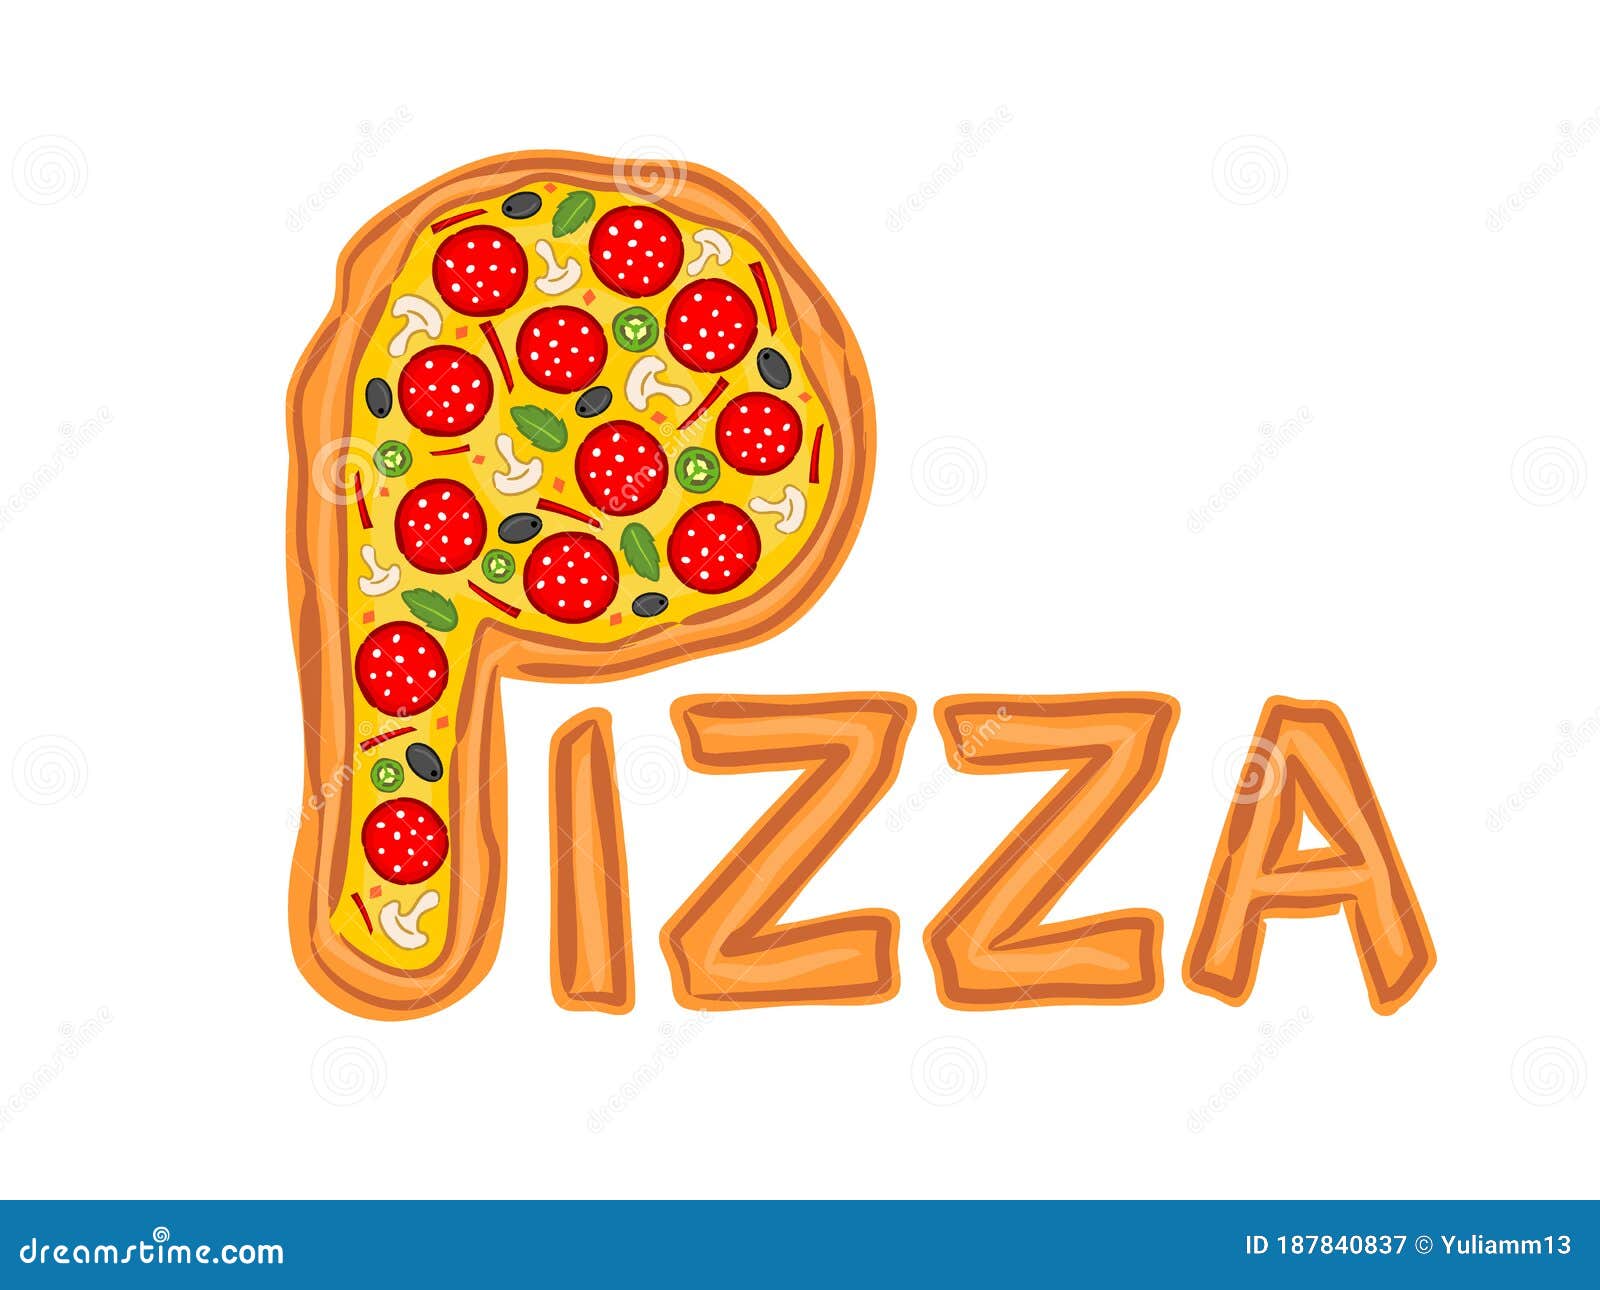 Letter P In The Form Of Pizza Logo For A Pizzeria Stock Vector Illustration Of Delicious Cheese